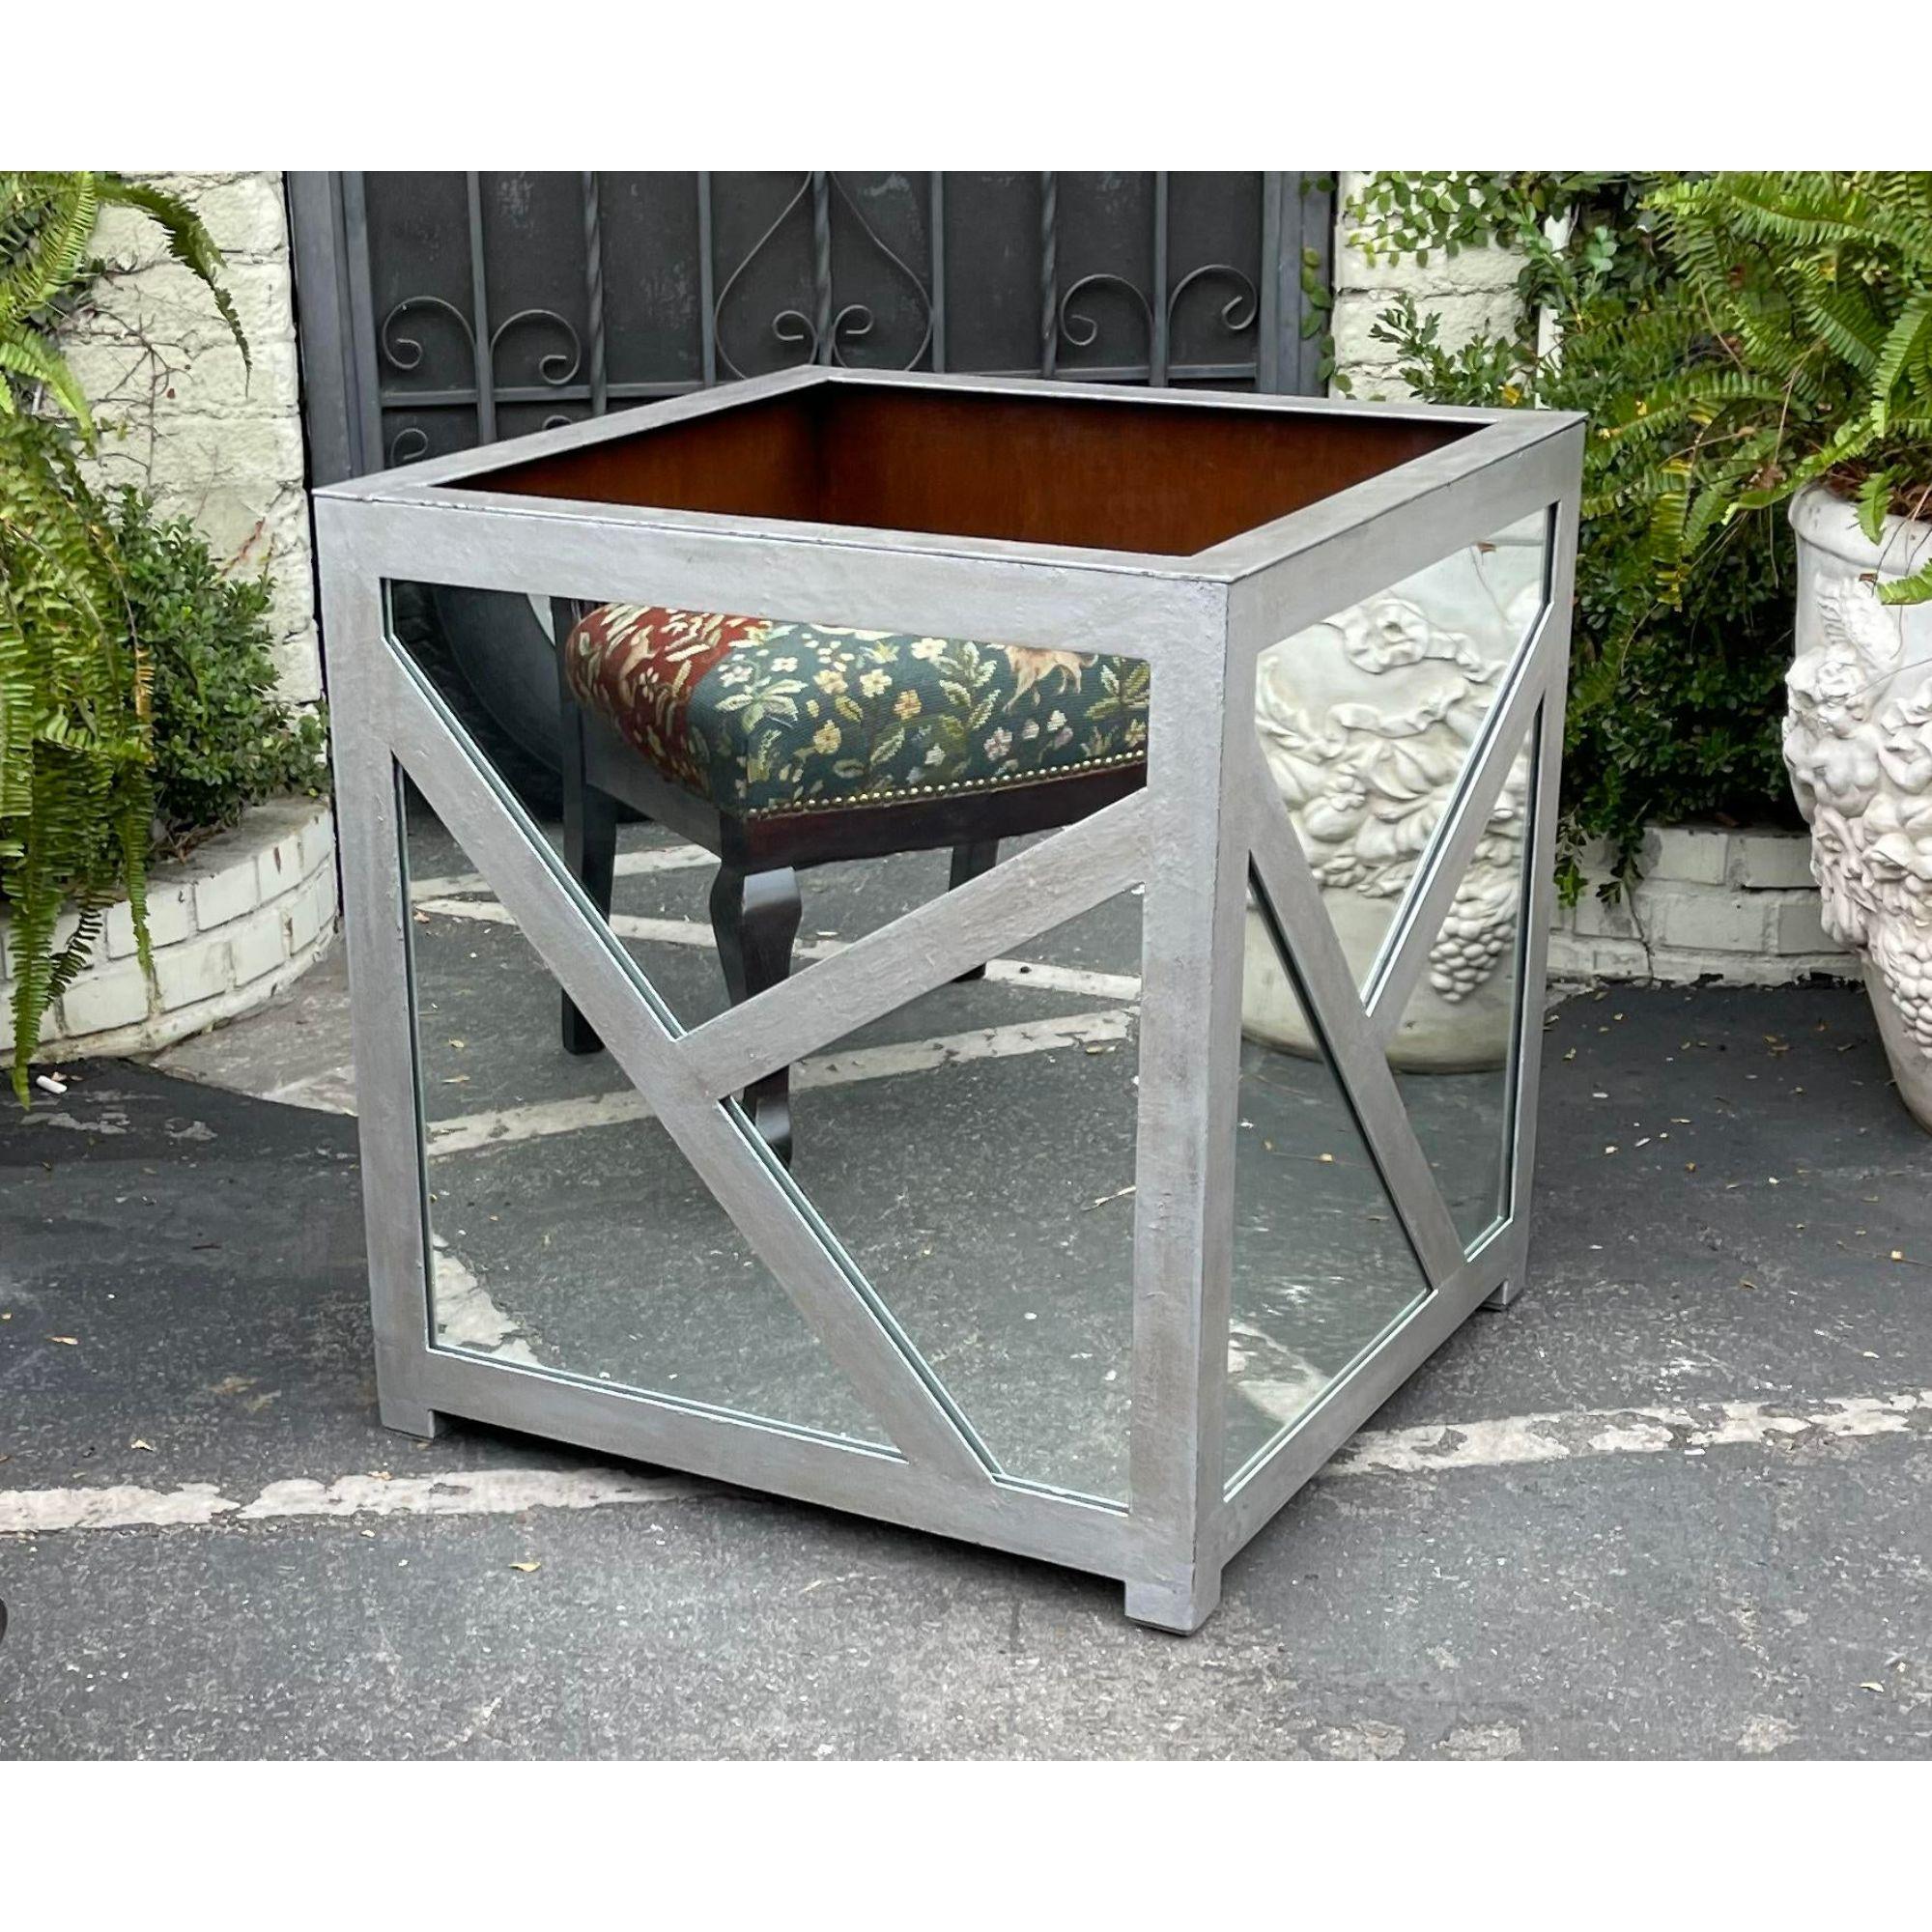 Art Deco Style Mahogany Lined Mirrored Iron Planter, 1990s For Sale 4